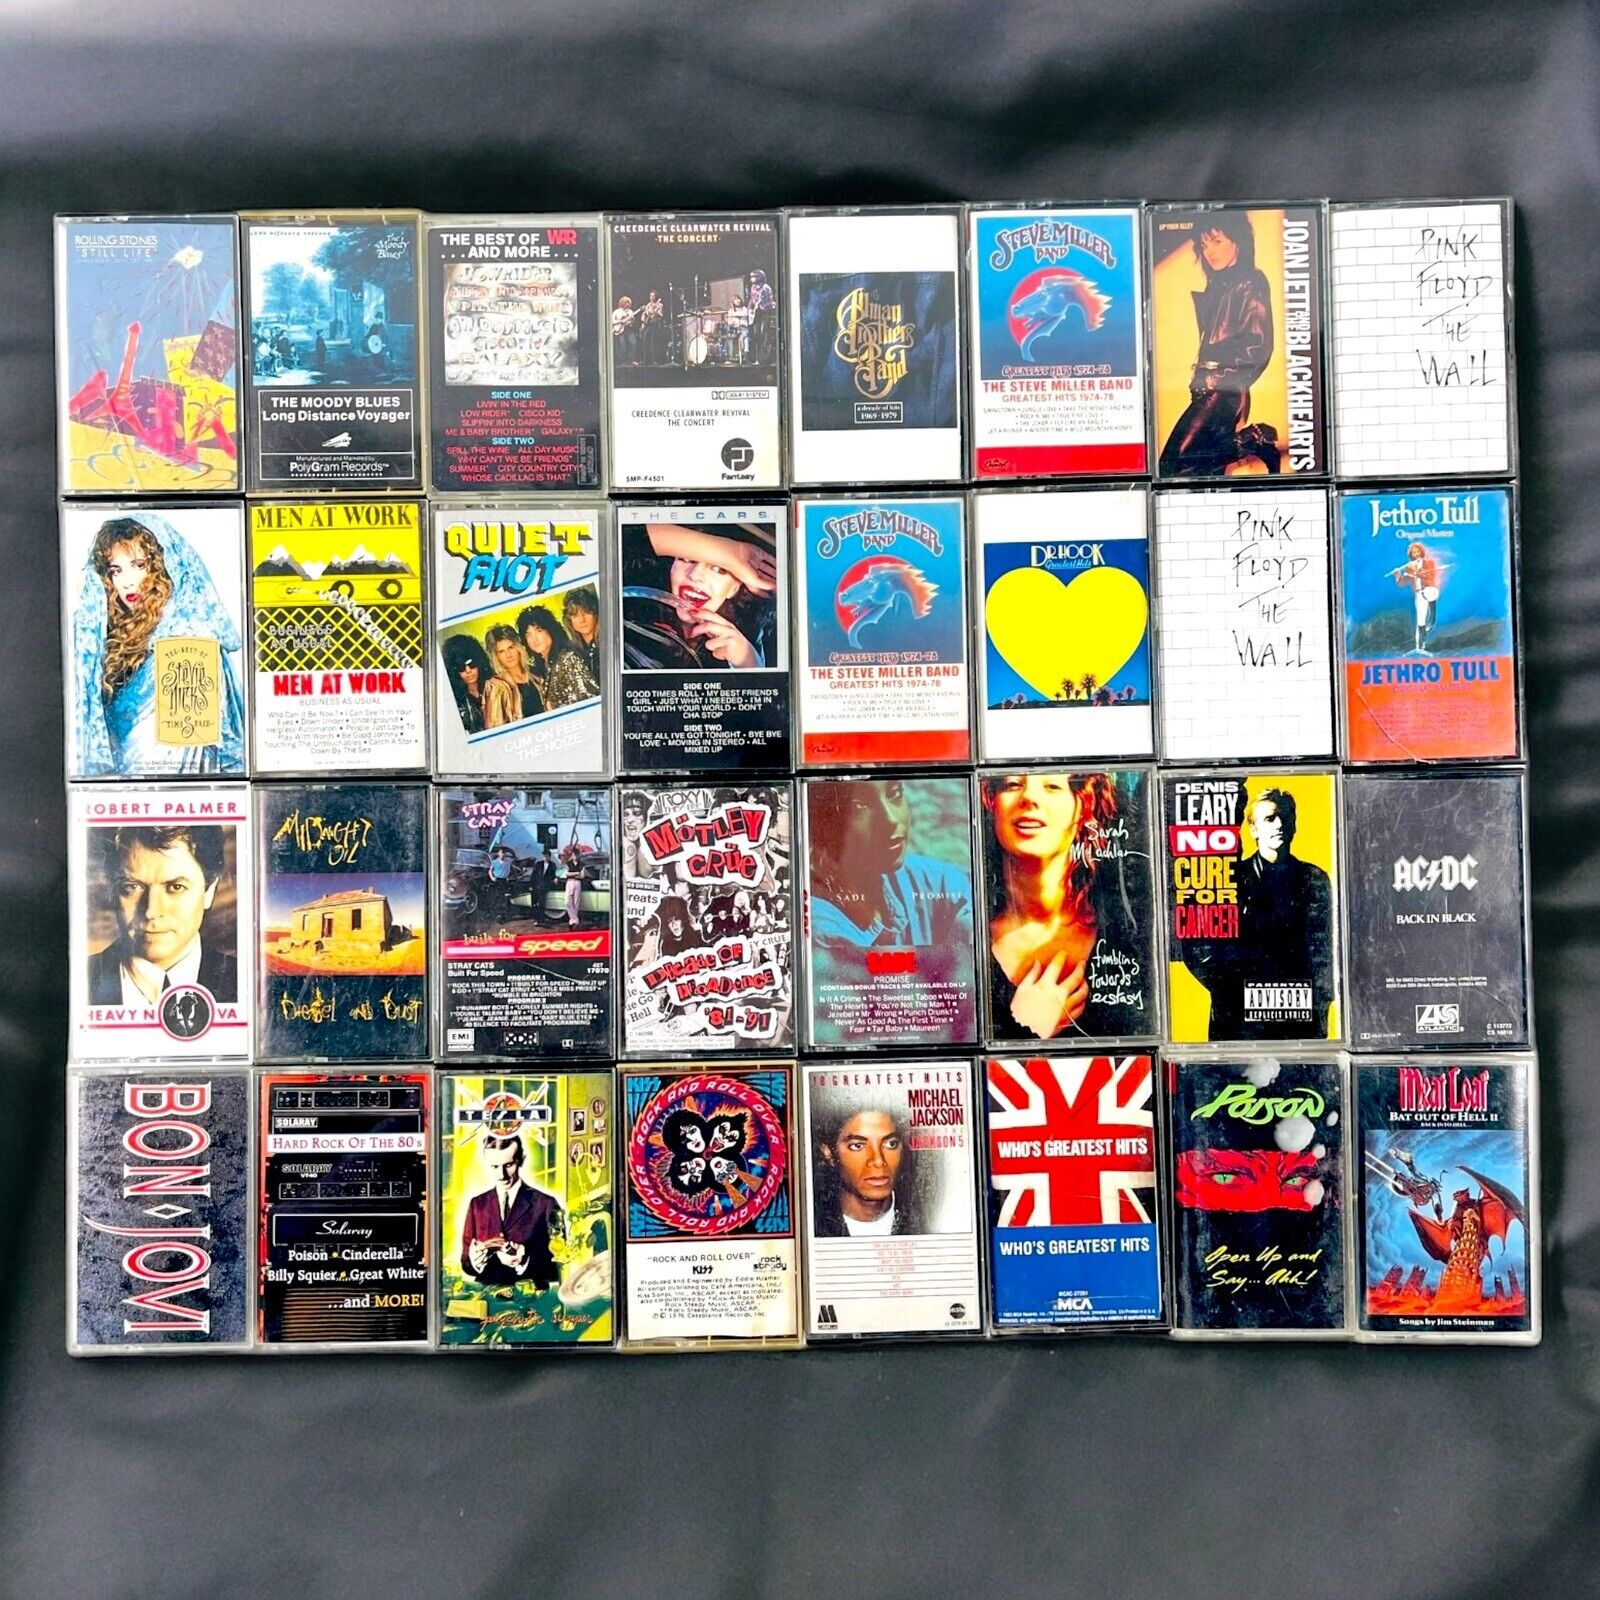 Rock and Roll Music Cassette Tapes Lot of 32 Vintage 70’s 80’s Glam Pop Comedy